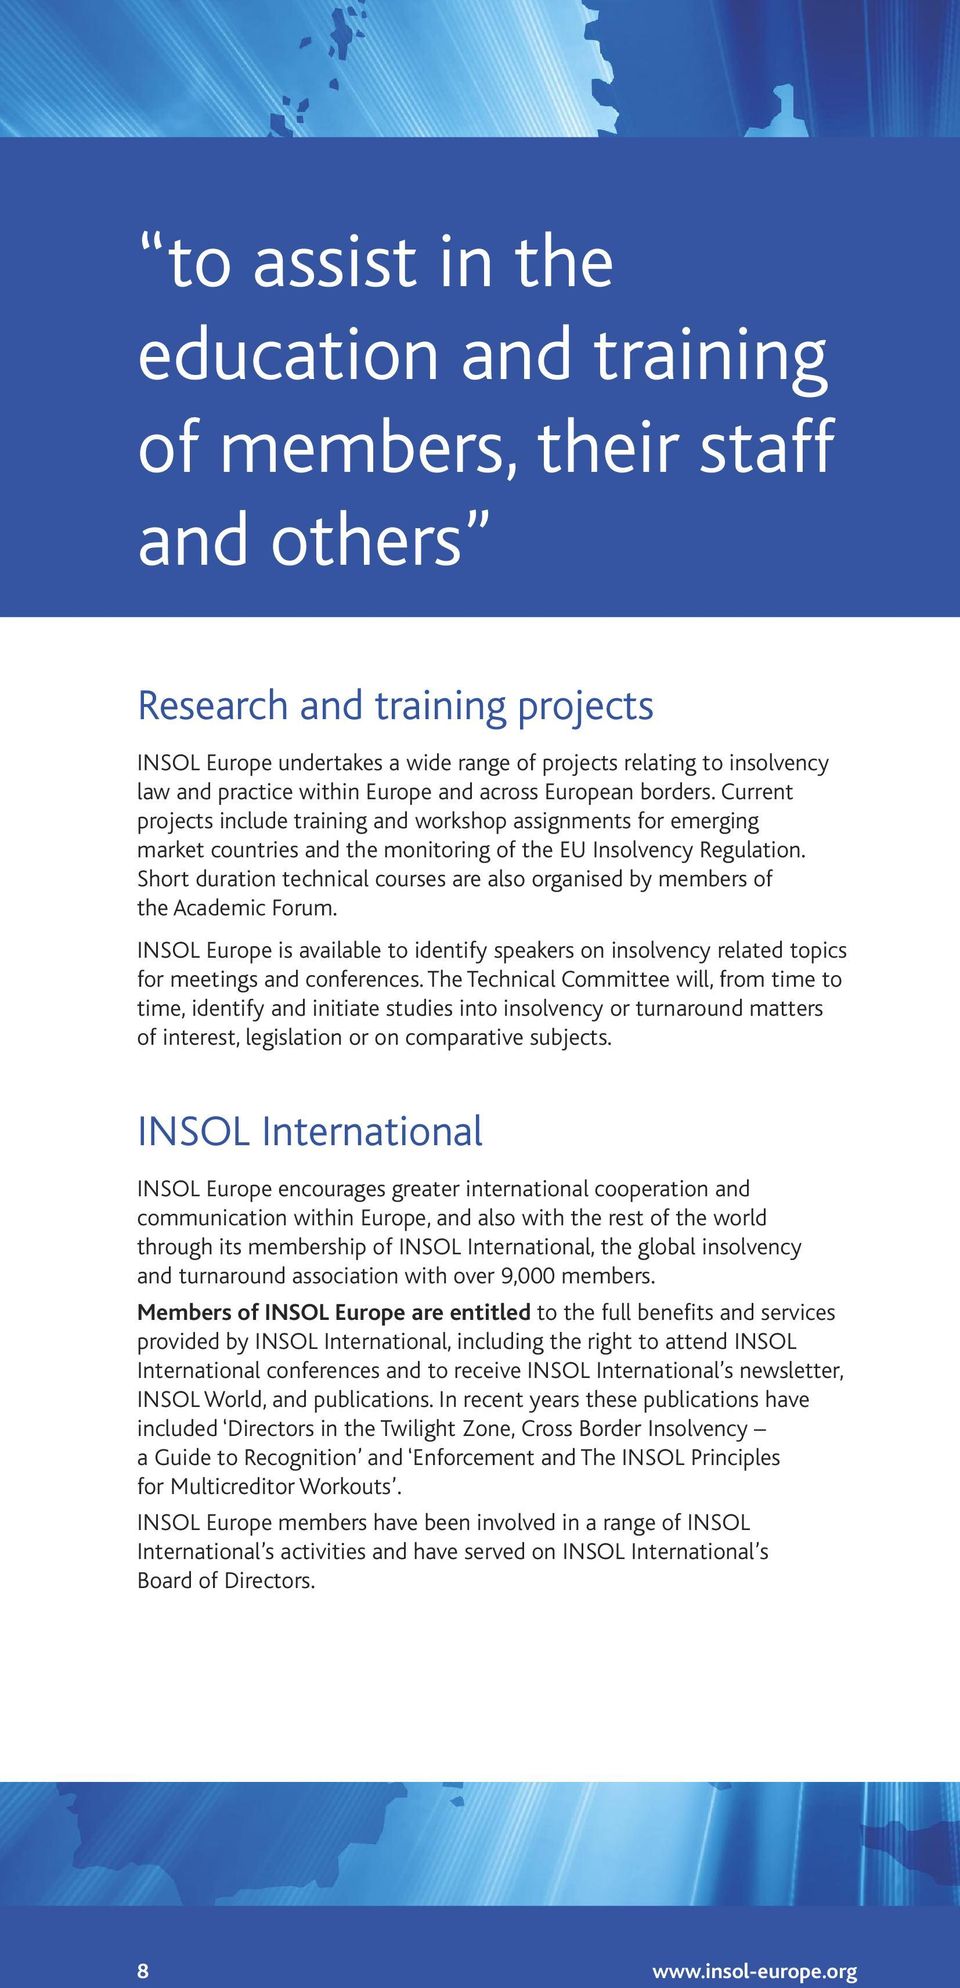 Short duration technical courses are also organised by members of the Academic Forum. INSOL Europe is available to identify speakers on insolvency related topics for meetings and conferences.